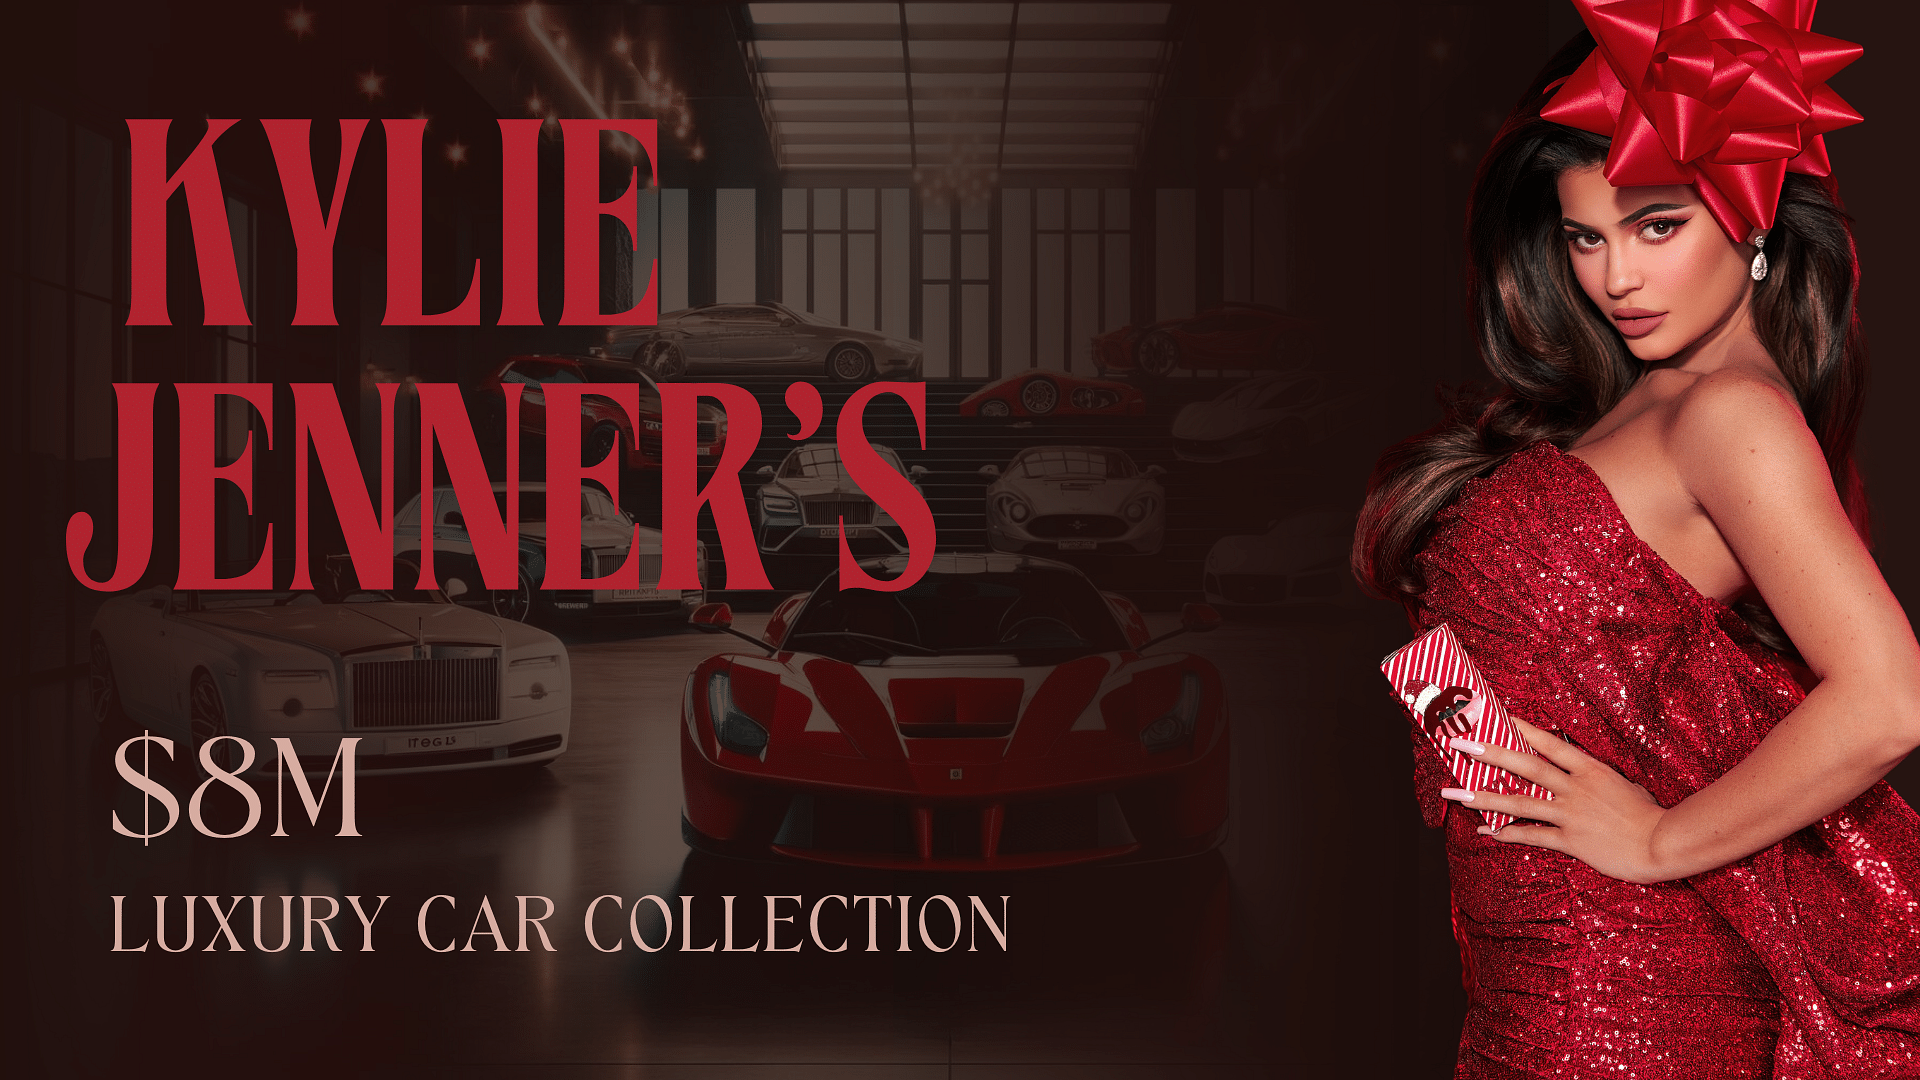 Kylie Jenner's Car Collection Truly Portrays Her Lavish Life